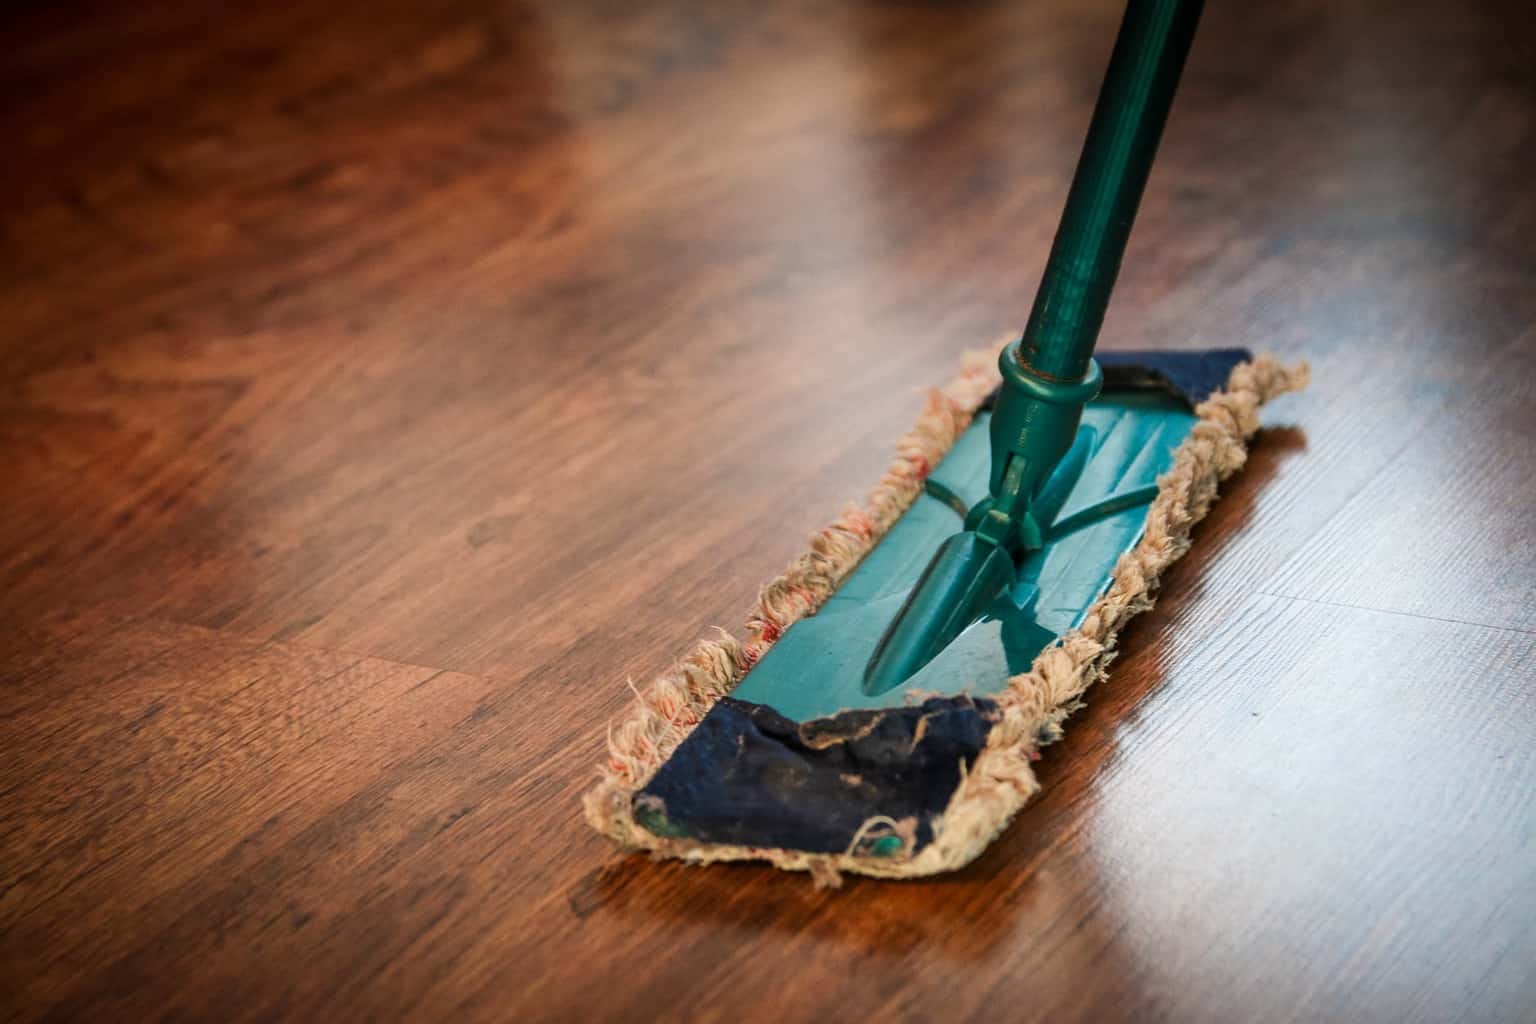 How To Clean Laminate Wood Floors The, How To Properly Clean Laminate Wood Floors